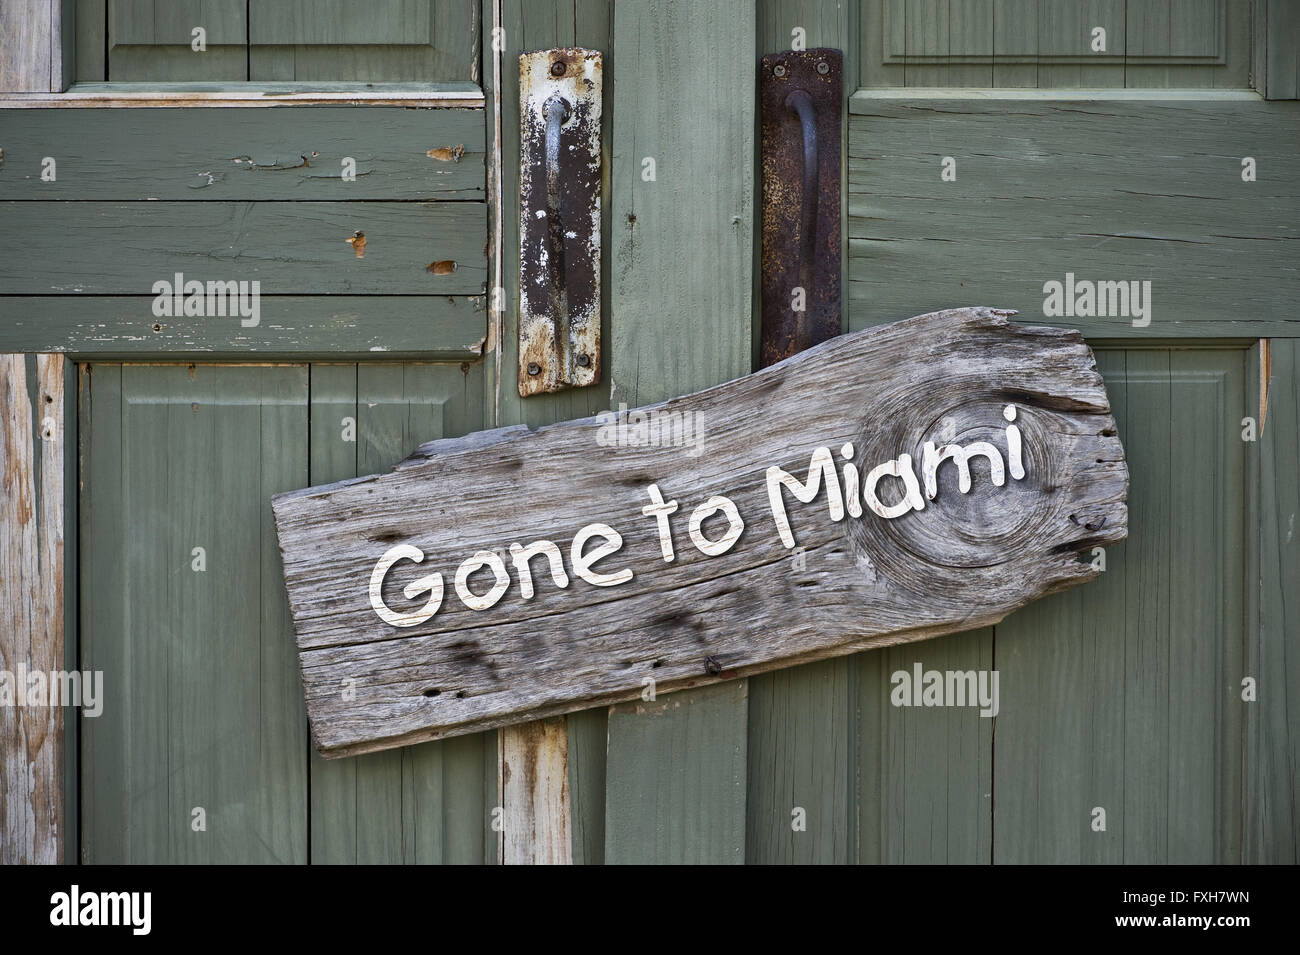 Gone to Miami sign on old green doors. Stock Photo